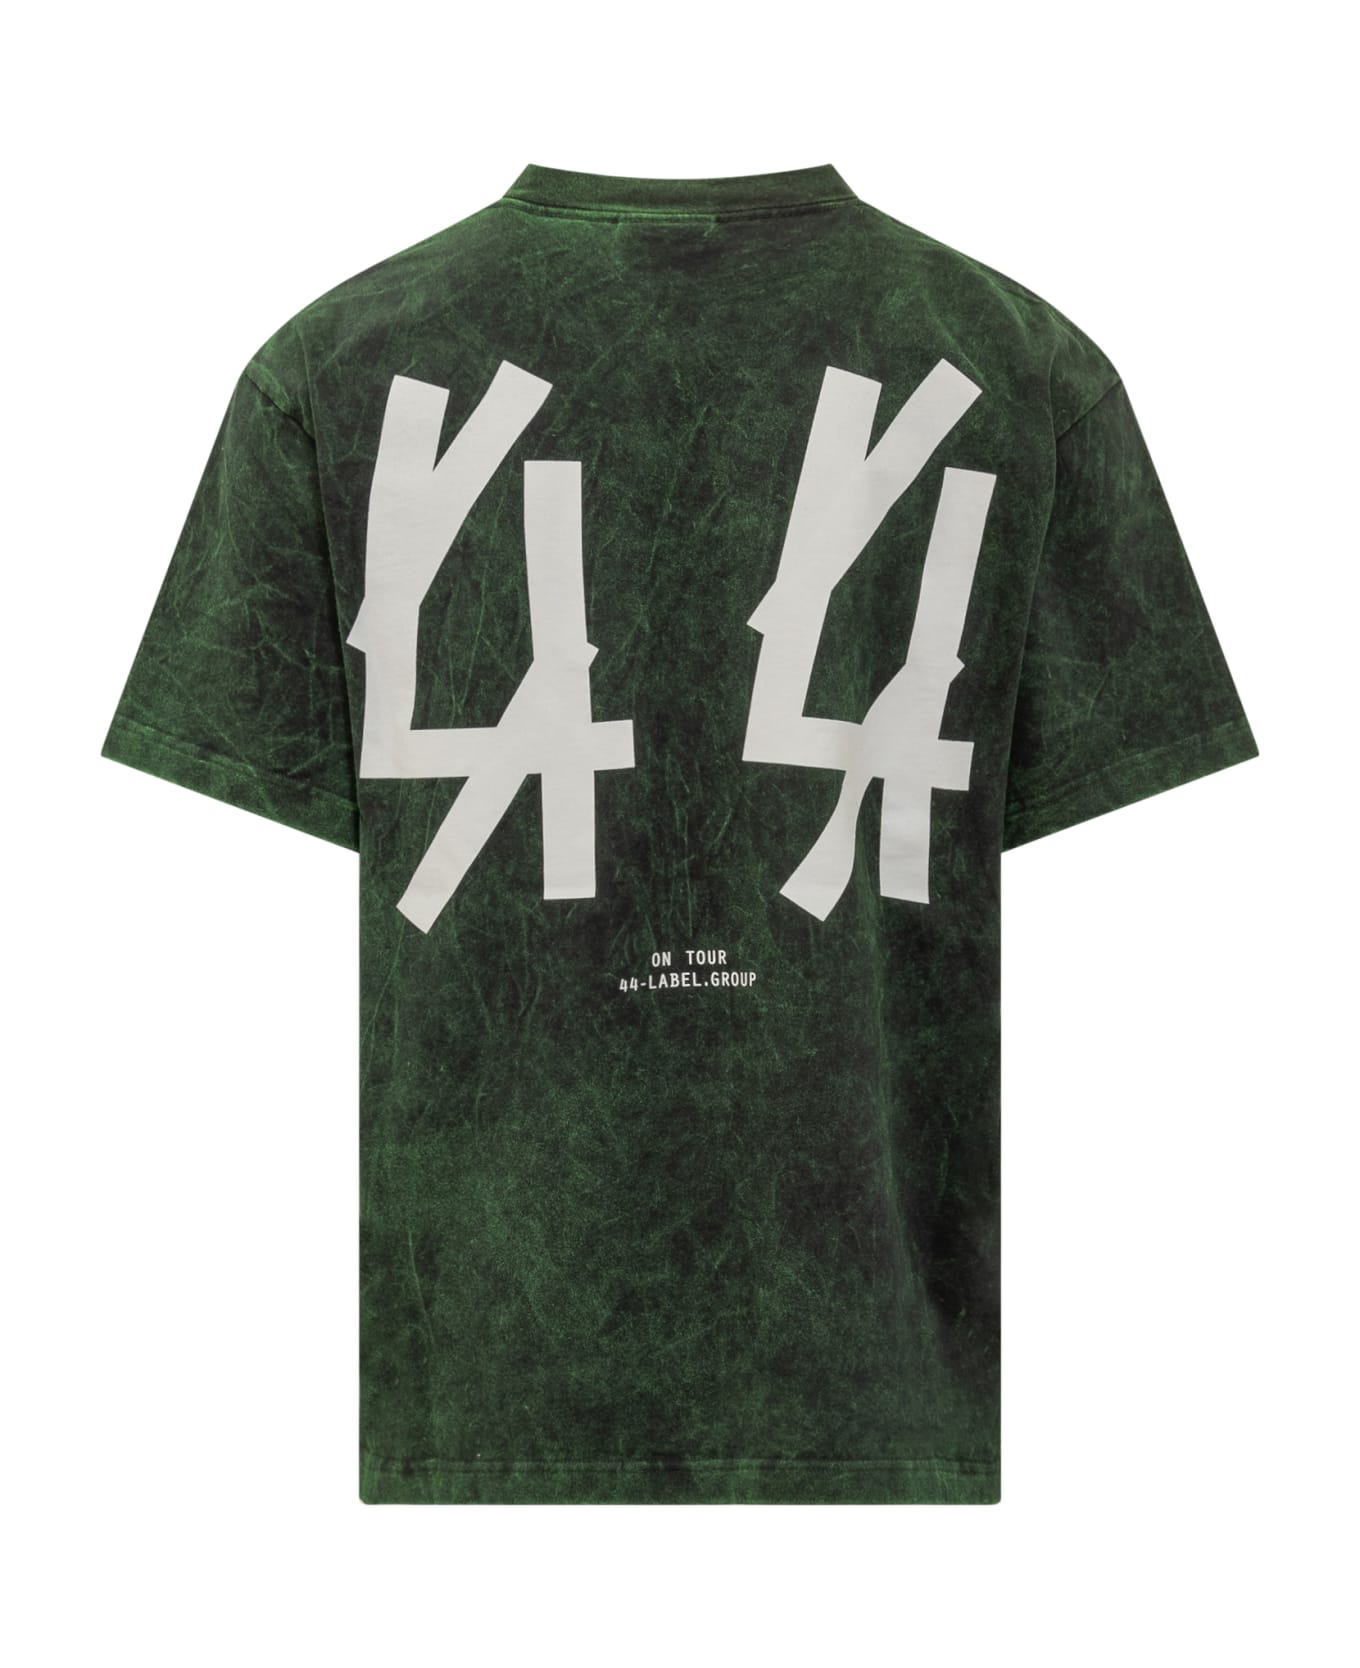 44 Label Group T-shirt With 44 Label Logo - BLACK-SOLID GREEN-44 SOLID シャツ